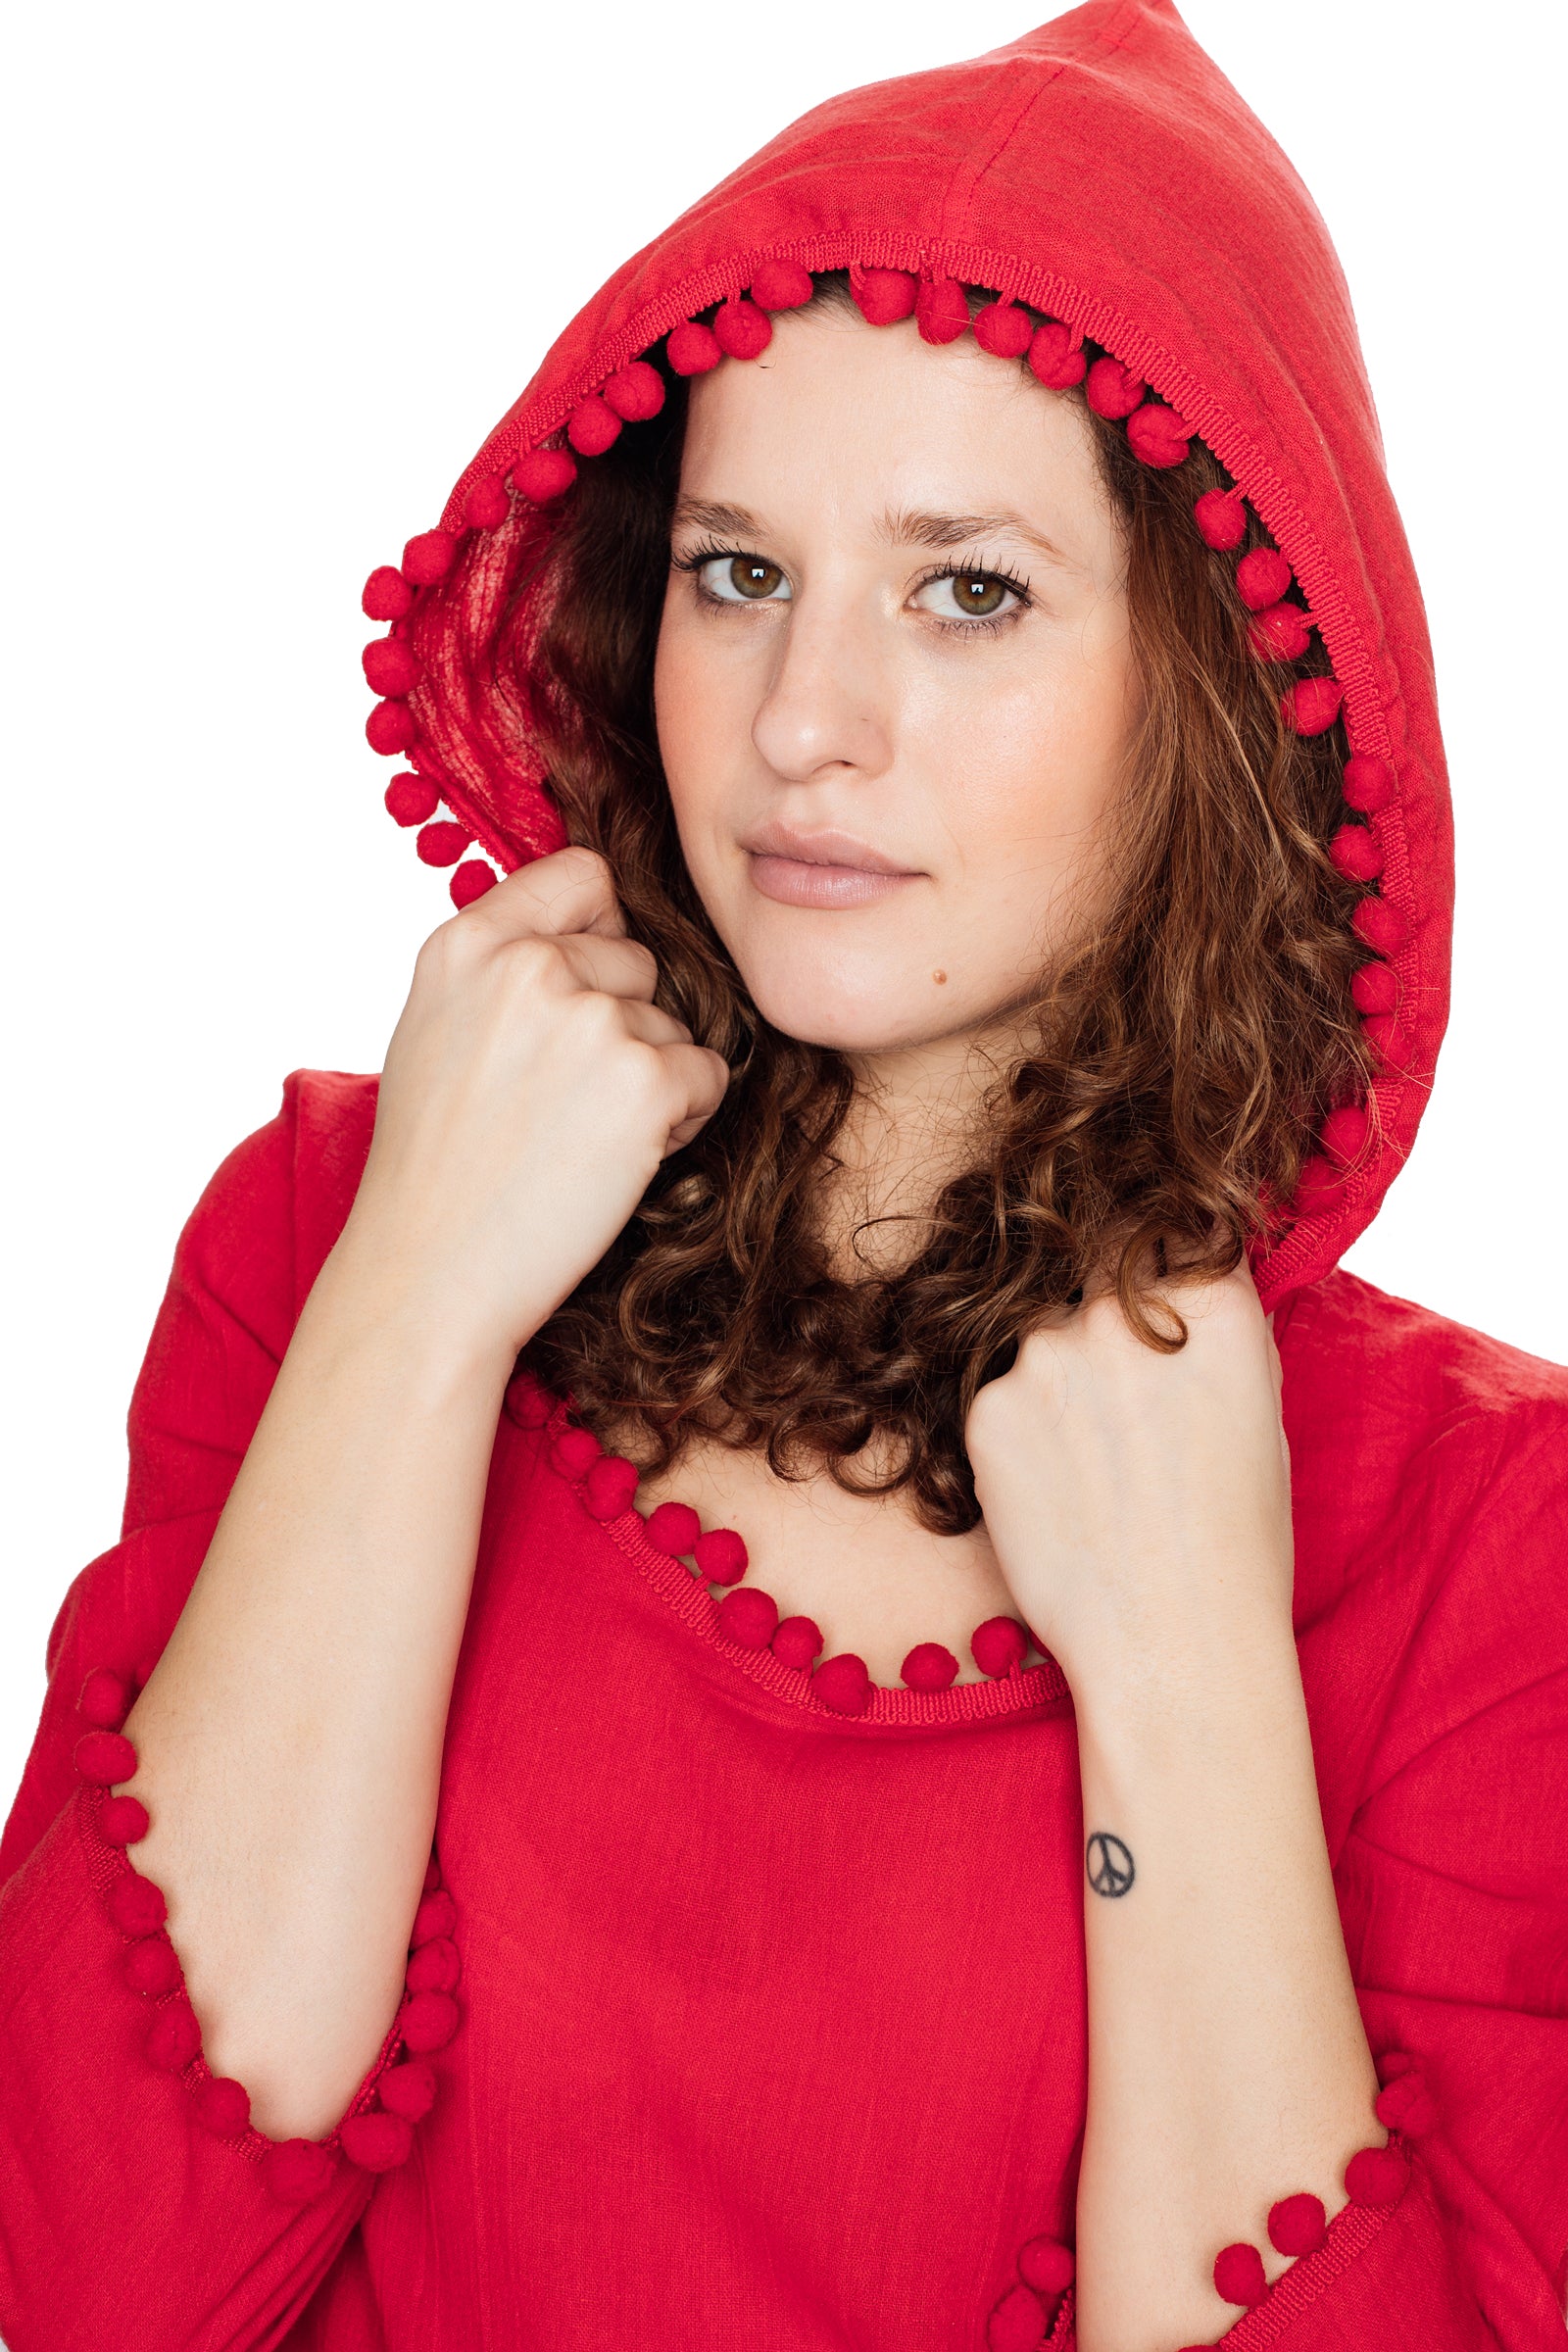 Coral Hooded Long Sleeve Cotton Coverup